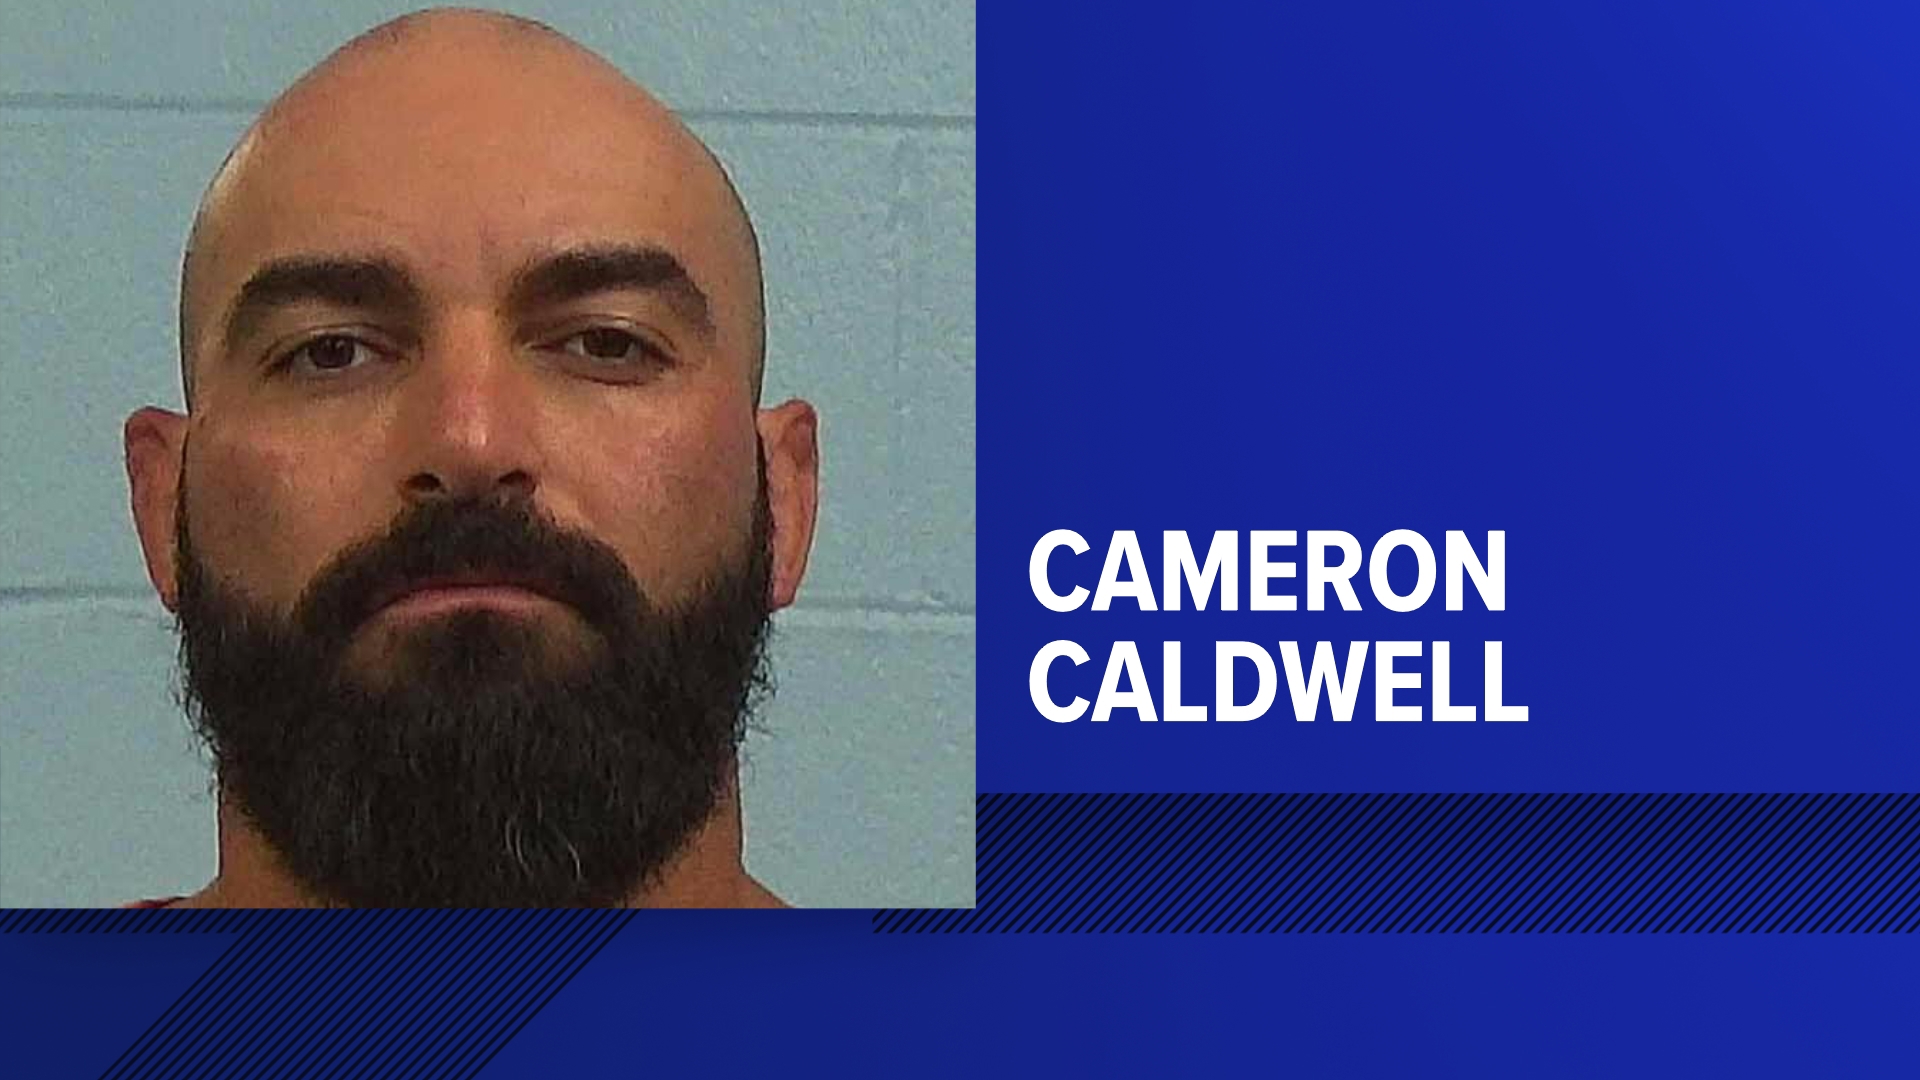 Officer Cameron Caldwell turned himself into the Williamson County Jail Friday morning.